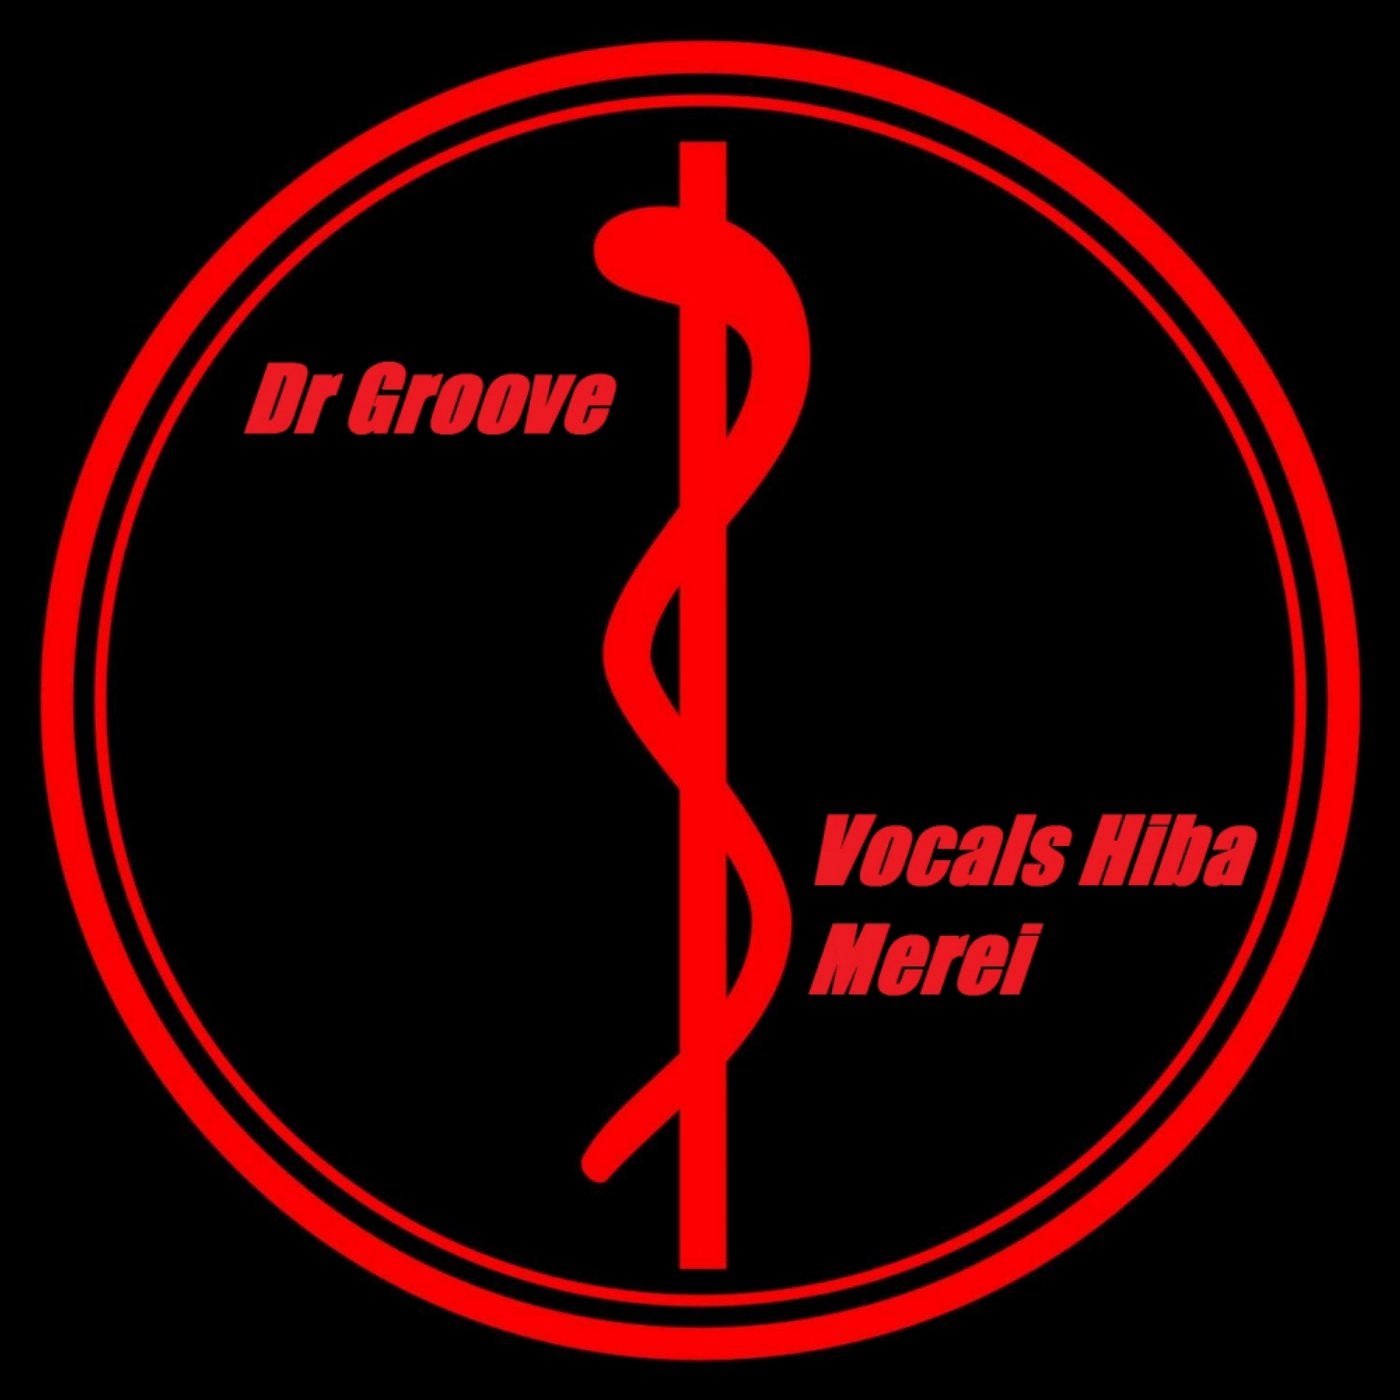 Dr Groove